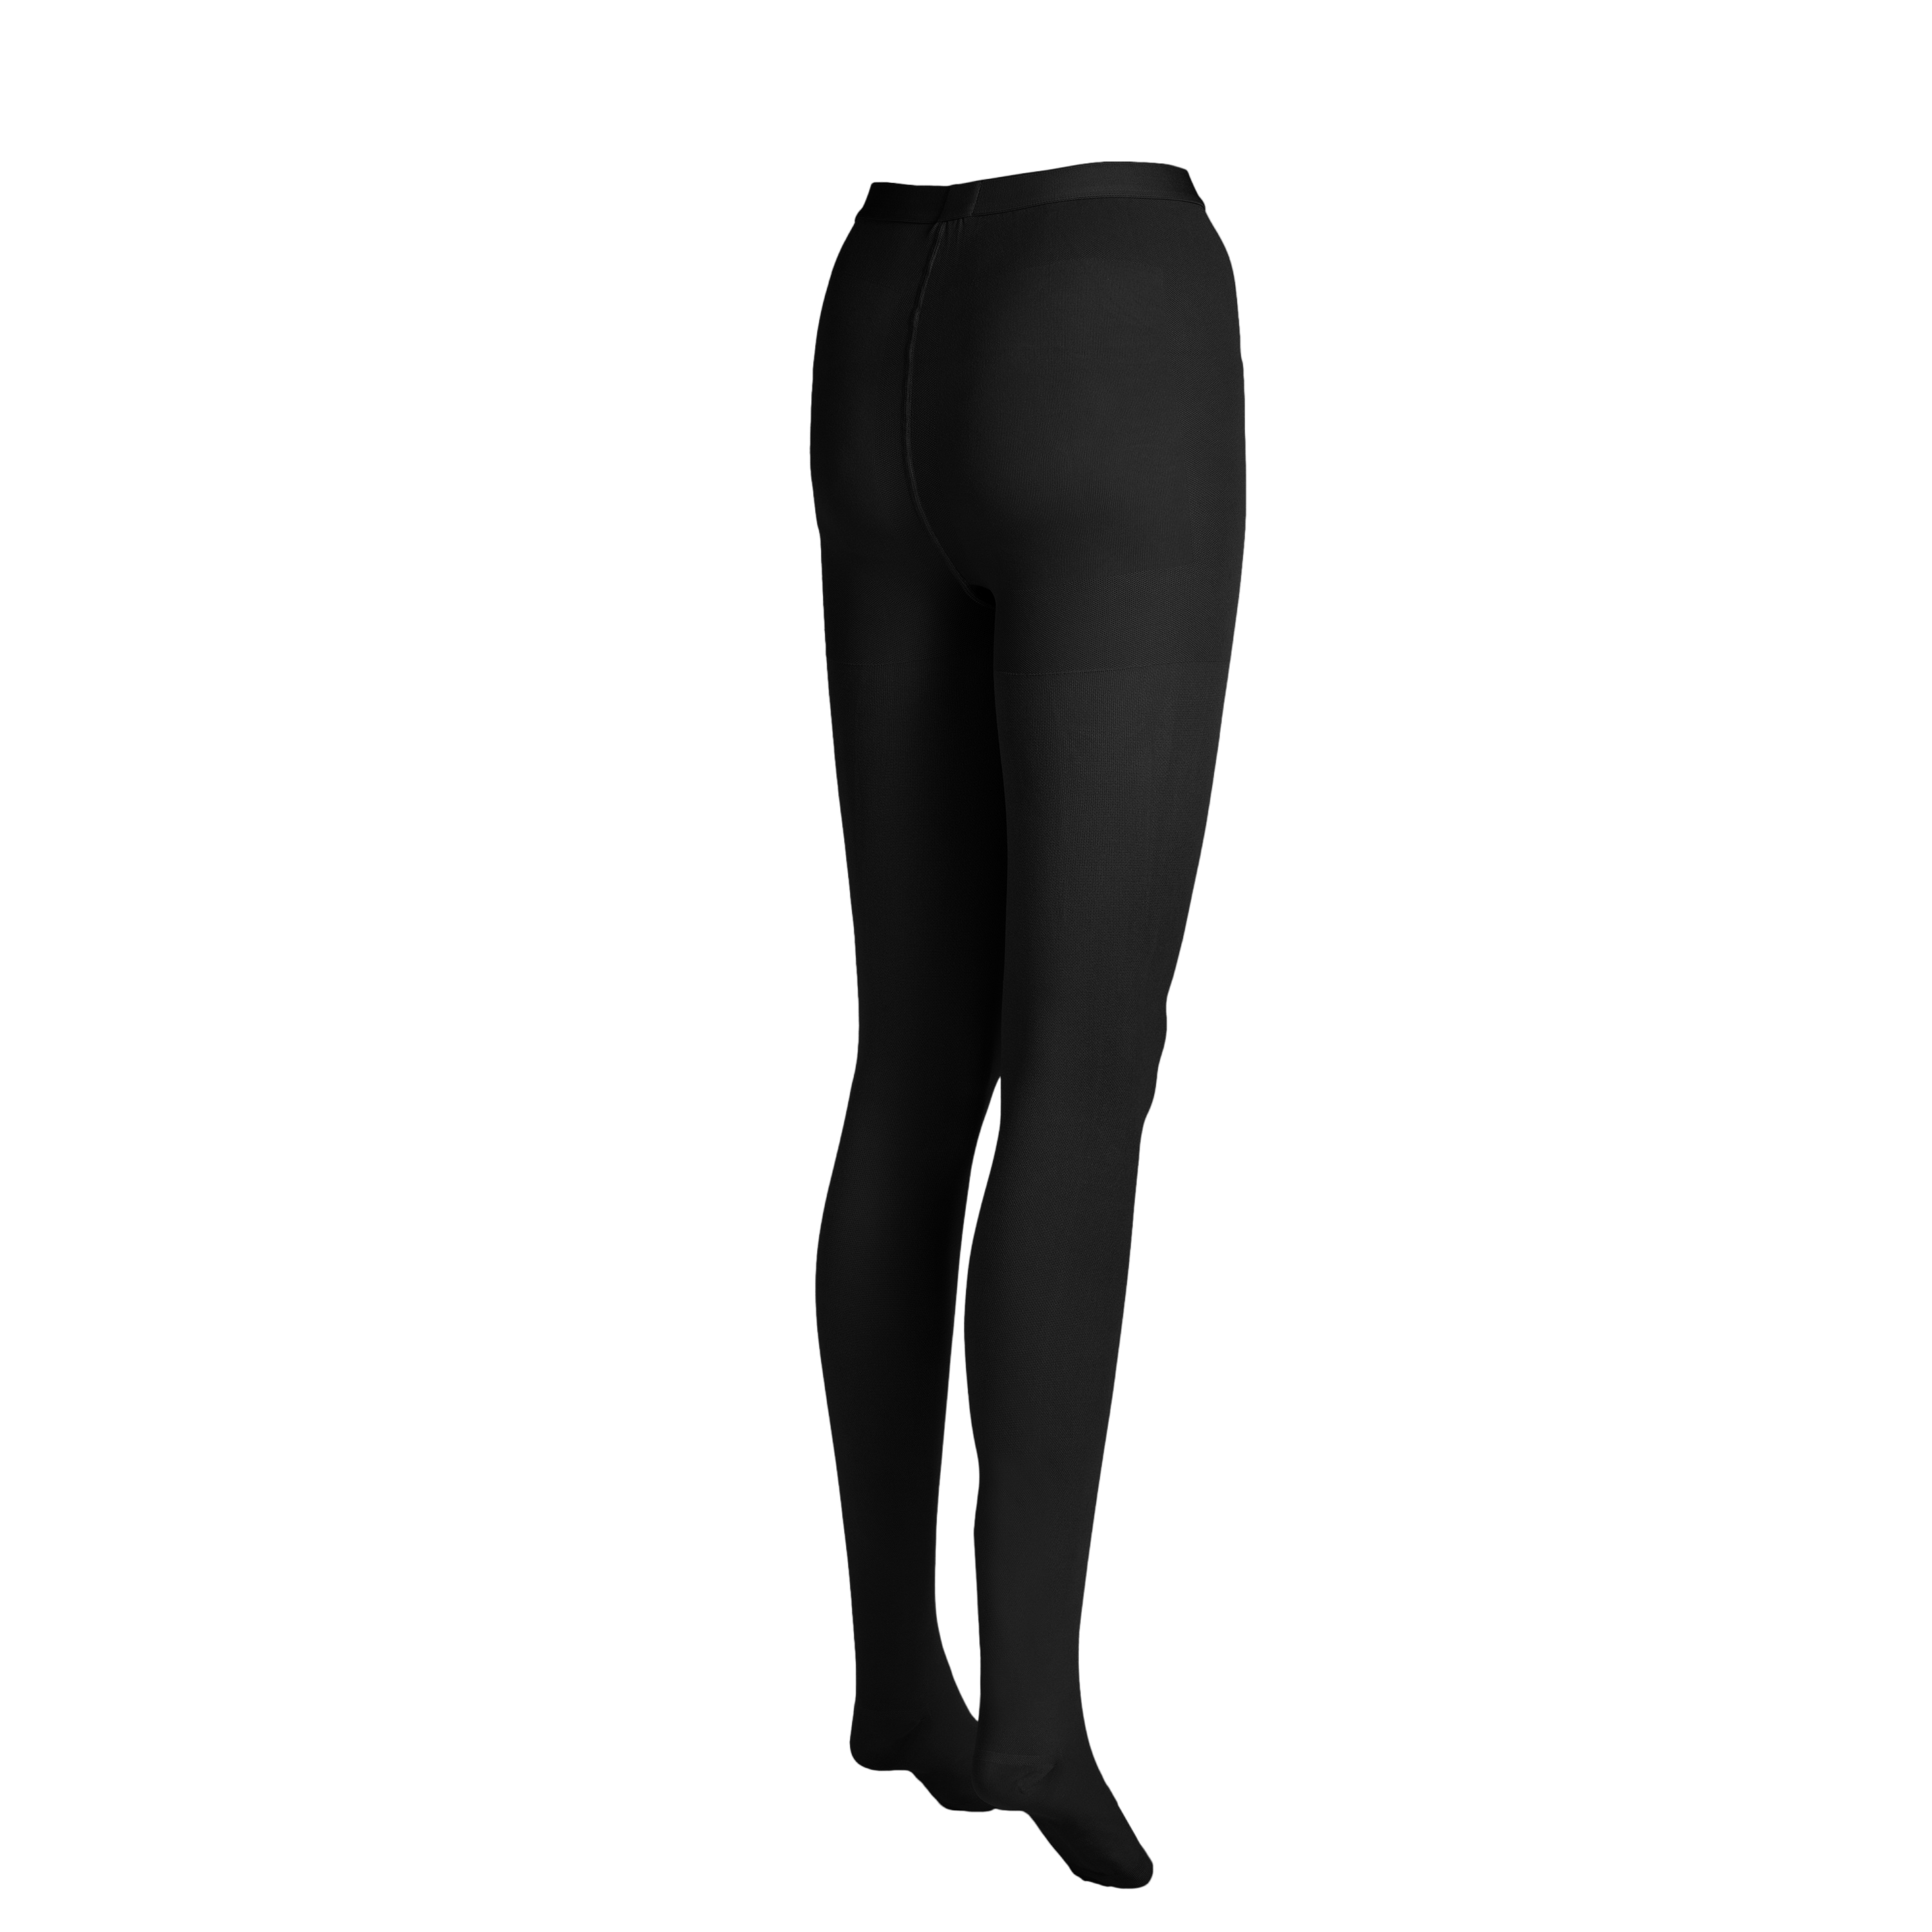  SZKANI Medical Compression Leggings for Women 20-30 mmhg  Compression Pantyhose, Medical Compression Tights for Varicose Veins,  Swelling, Lymphedema(Black(Footless)_XXL) : Health & Household